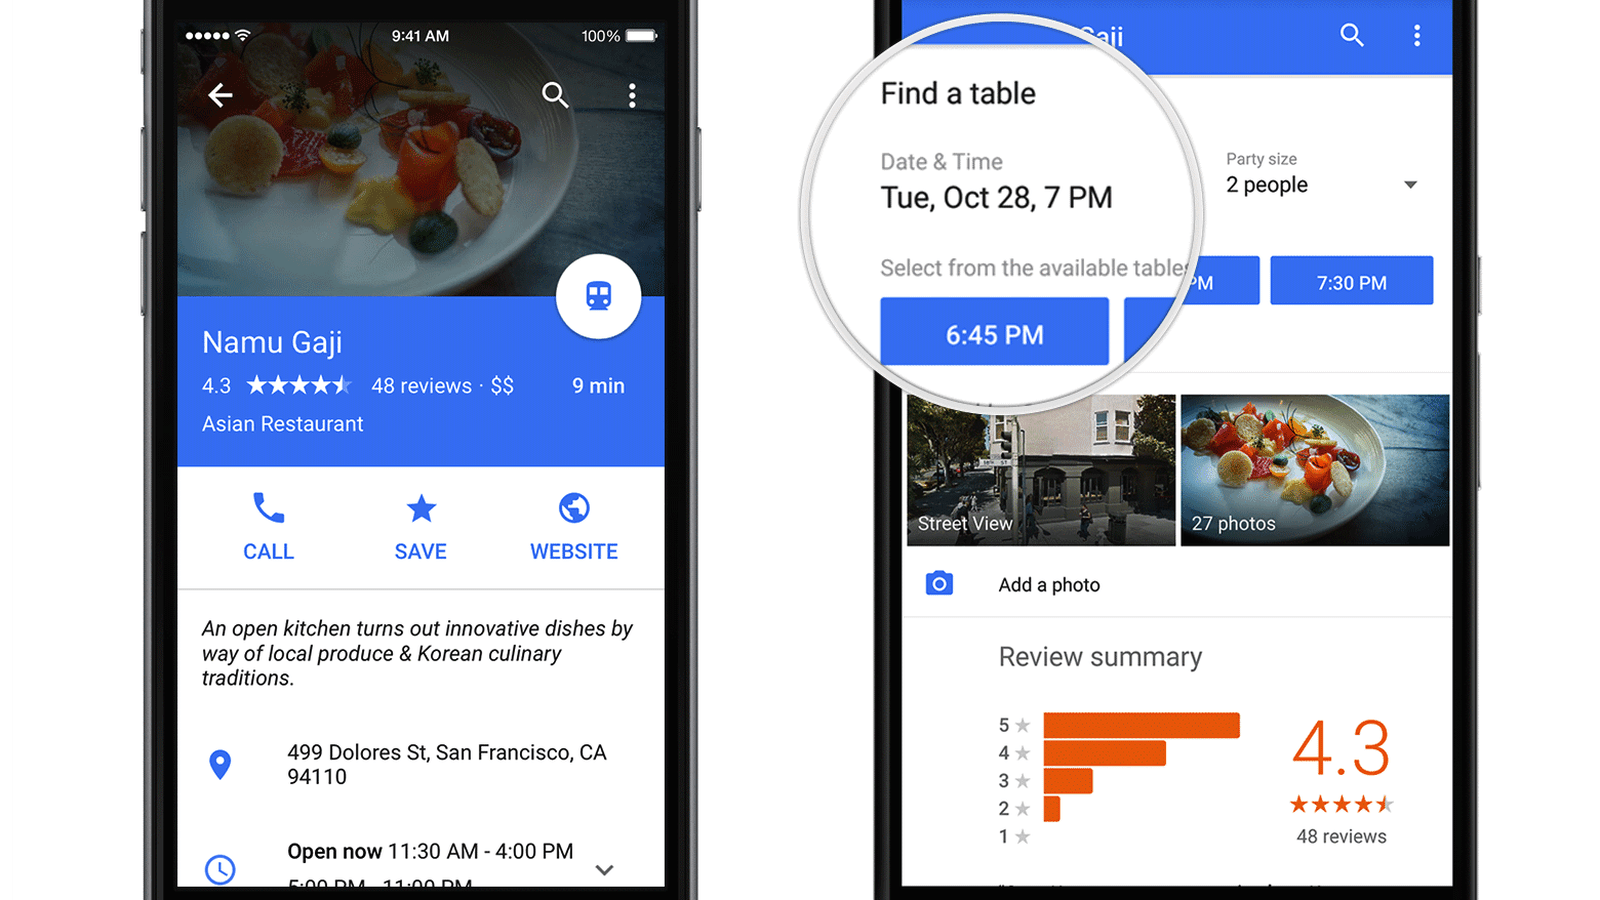 OpenTable Restaurant Logo - Google Maps Partners With OpenTable to Offer Restaurant Reservations